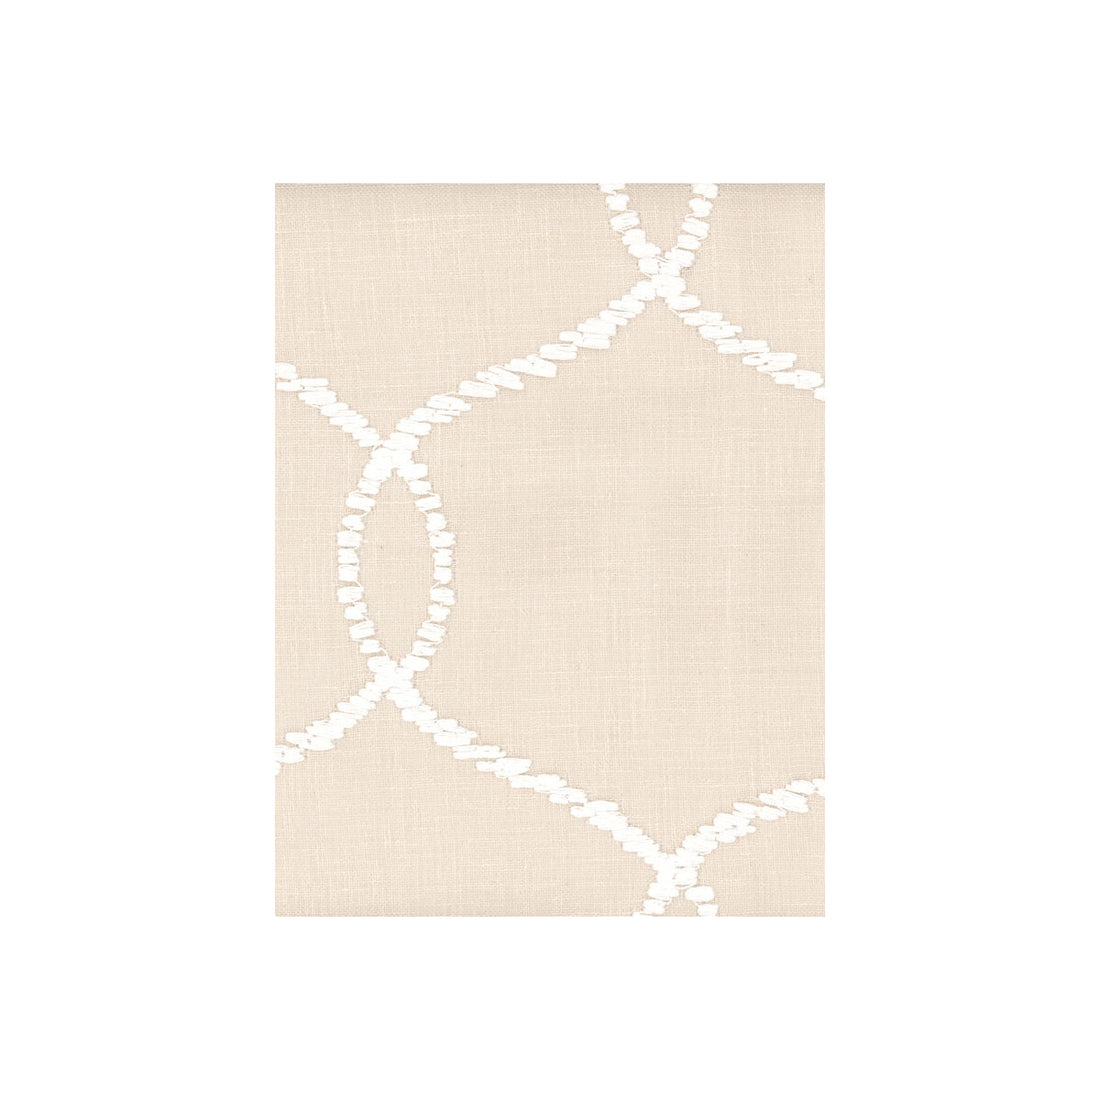 Anchor fabric in natural color - pattern AM100071.16.0 - by Kravet Couture in the Andrew Martin Harbour collection